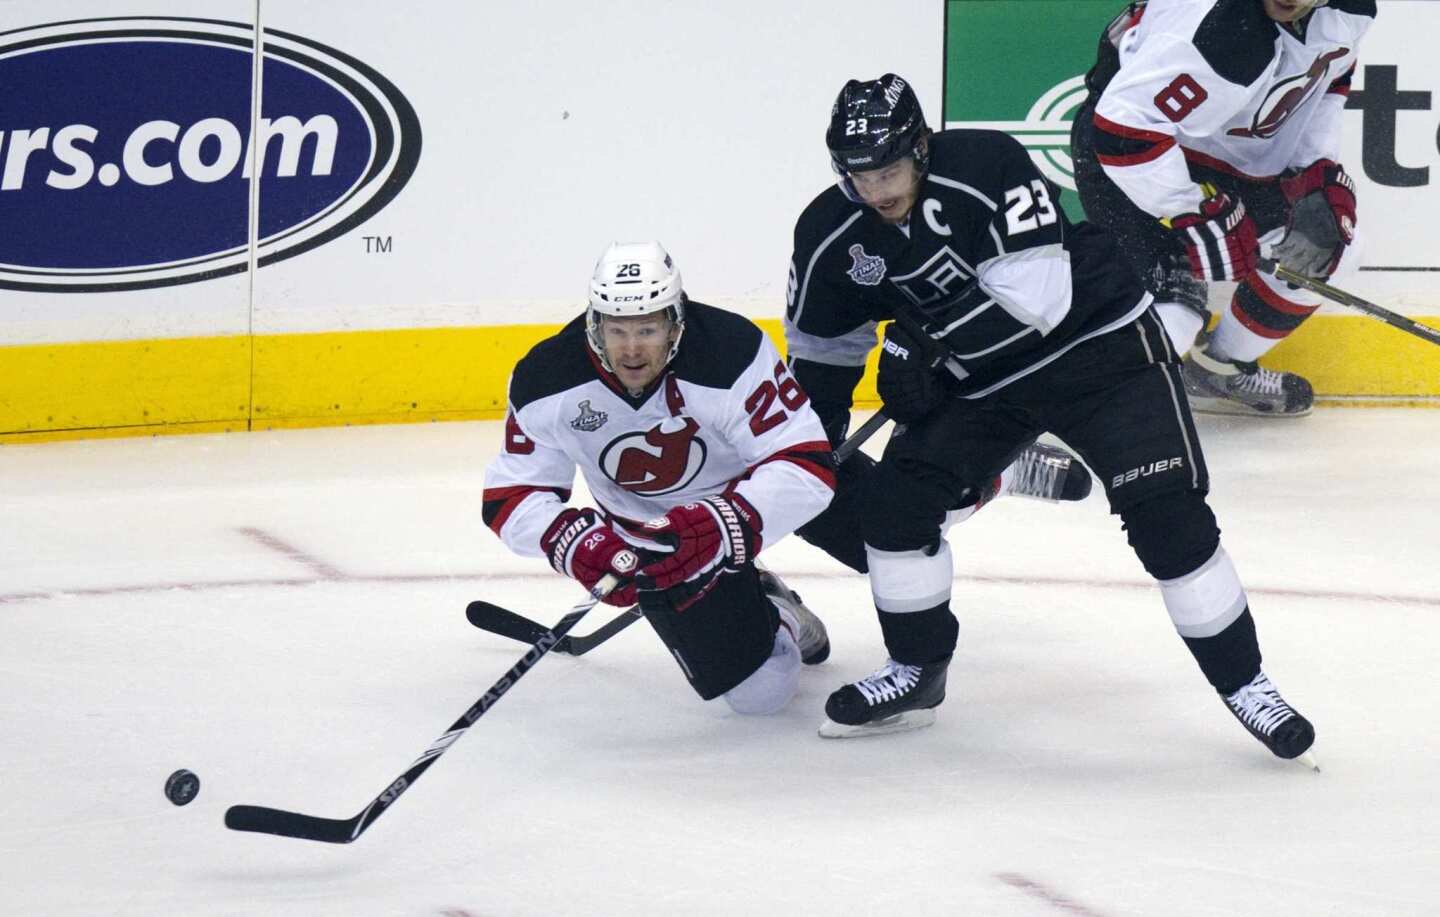 New Jersey forward Patrik Elias, left, and Kings captain Dustin Brown battle for the puck during the first period of Game 3 of the Stanley Cup Final.